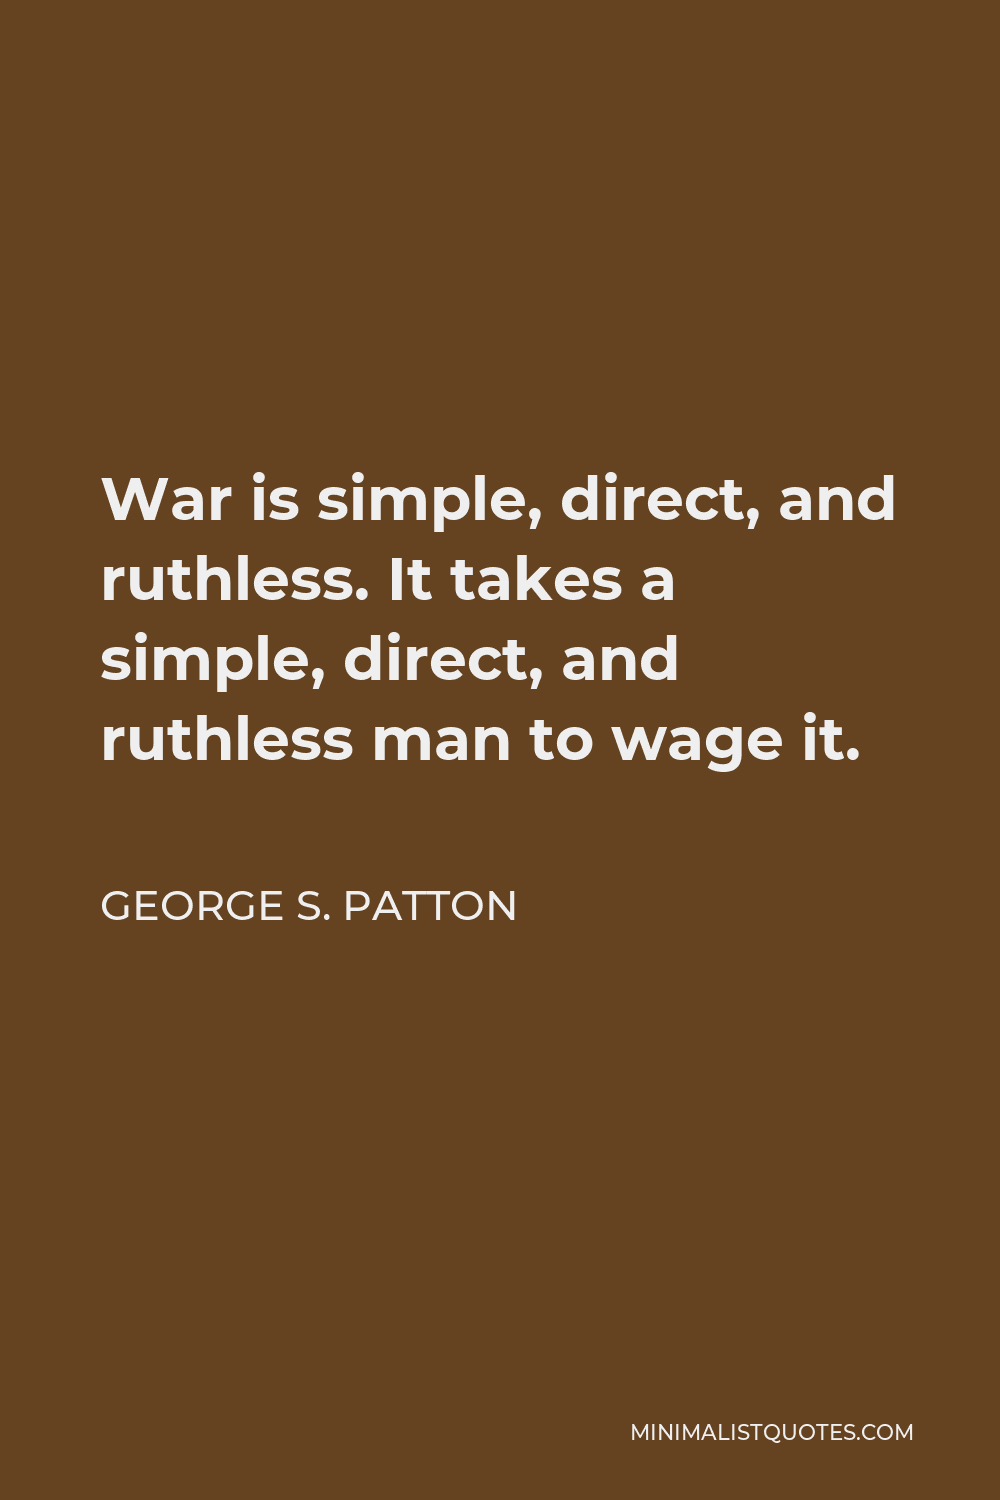 George S. Patton Quote - War is simple, direct, and ruthless. It takes a simple, direct, and ruthless man to wage it.